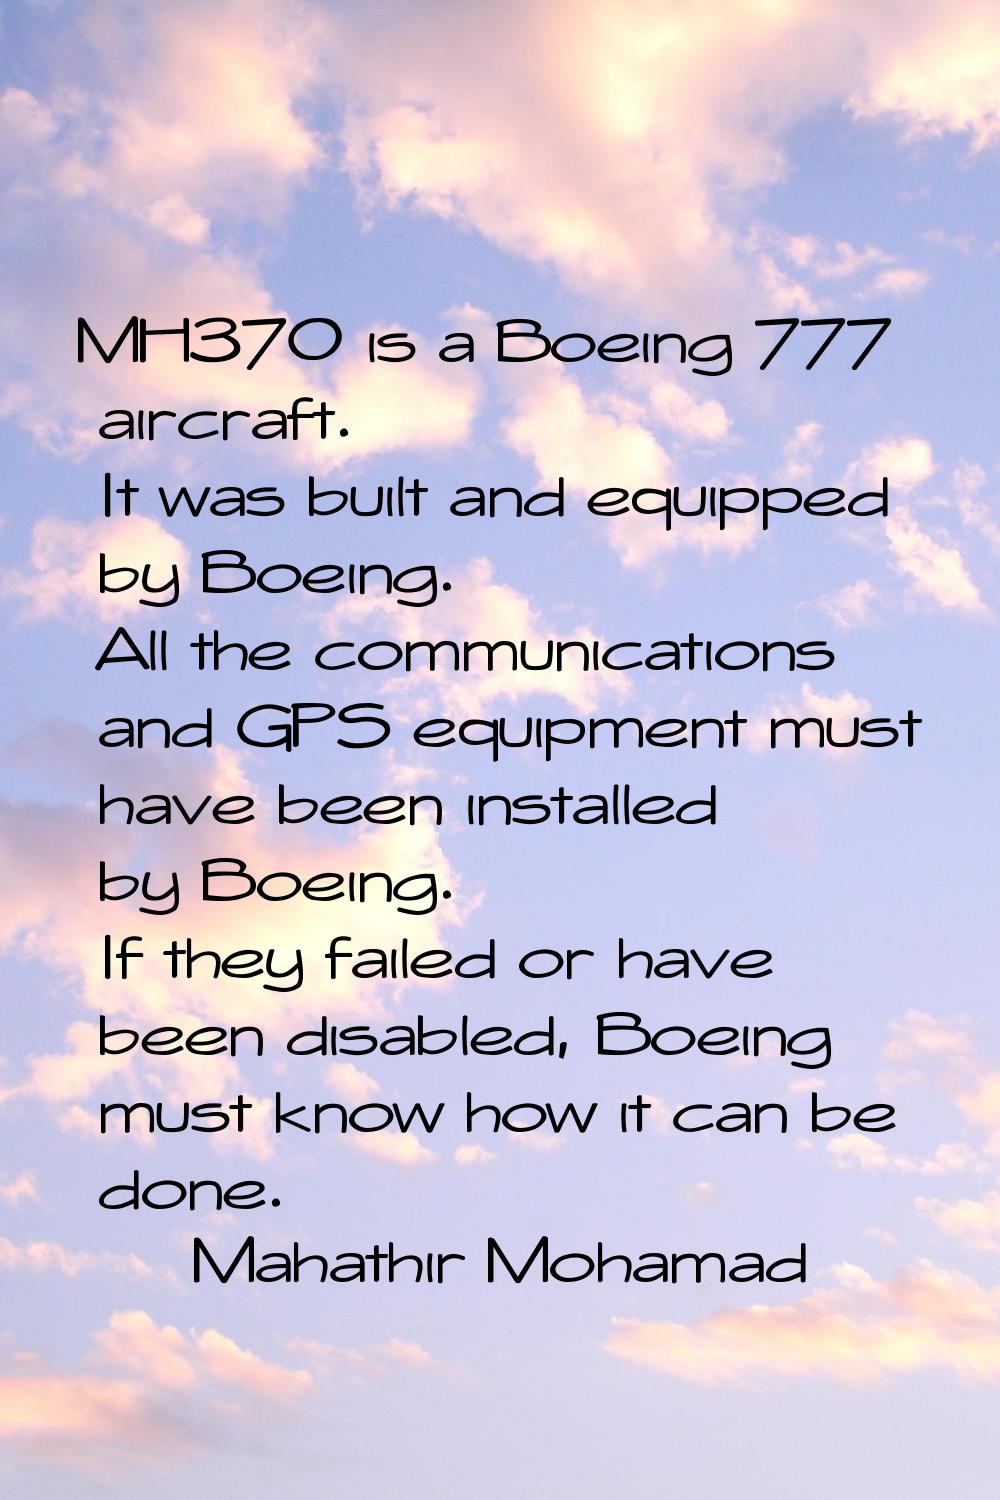 MH370 is a Boeing 777 aircraft. It was built and equipped by Boeing. All the communications and GPS